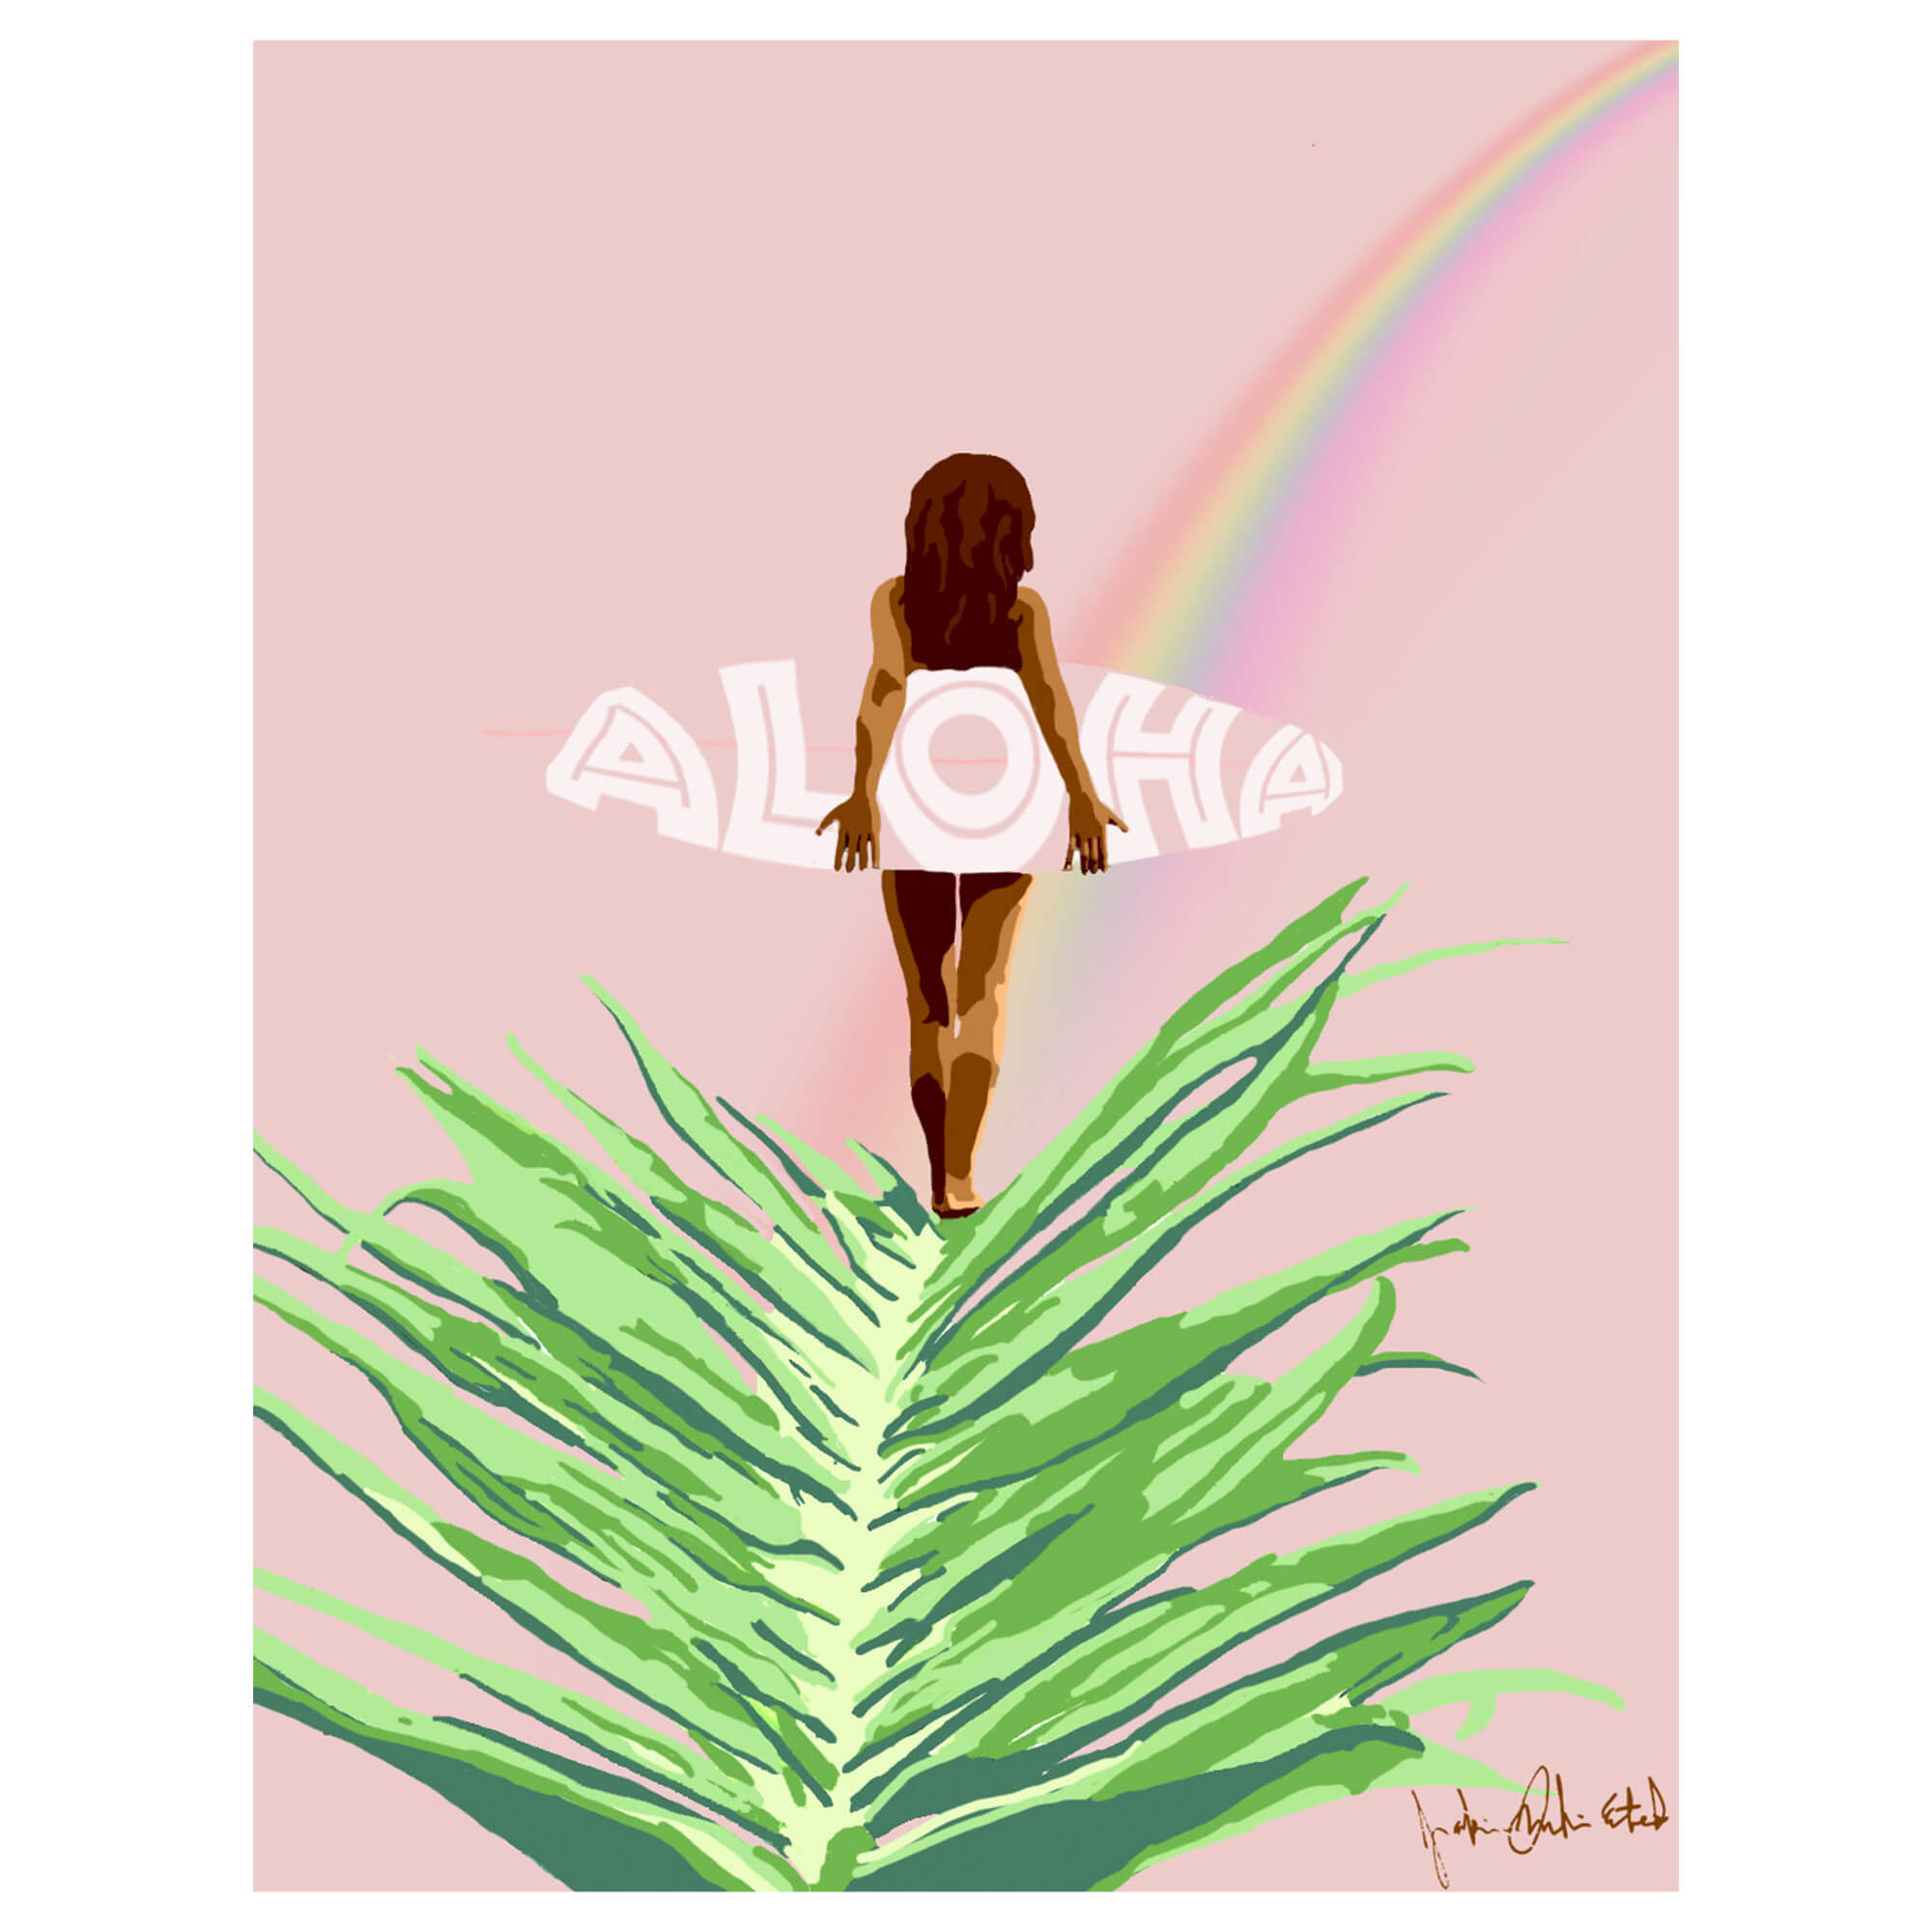 A wood print of a woman holding an Aloha surfboard following a beautiful rainbow on a pastel pink background, printed on a birch wood panel by Hawaii artist Jackie Eitel